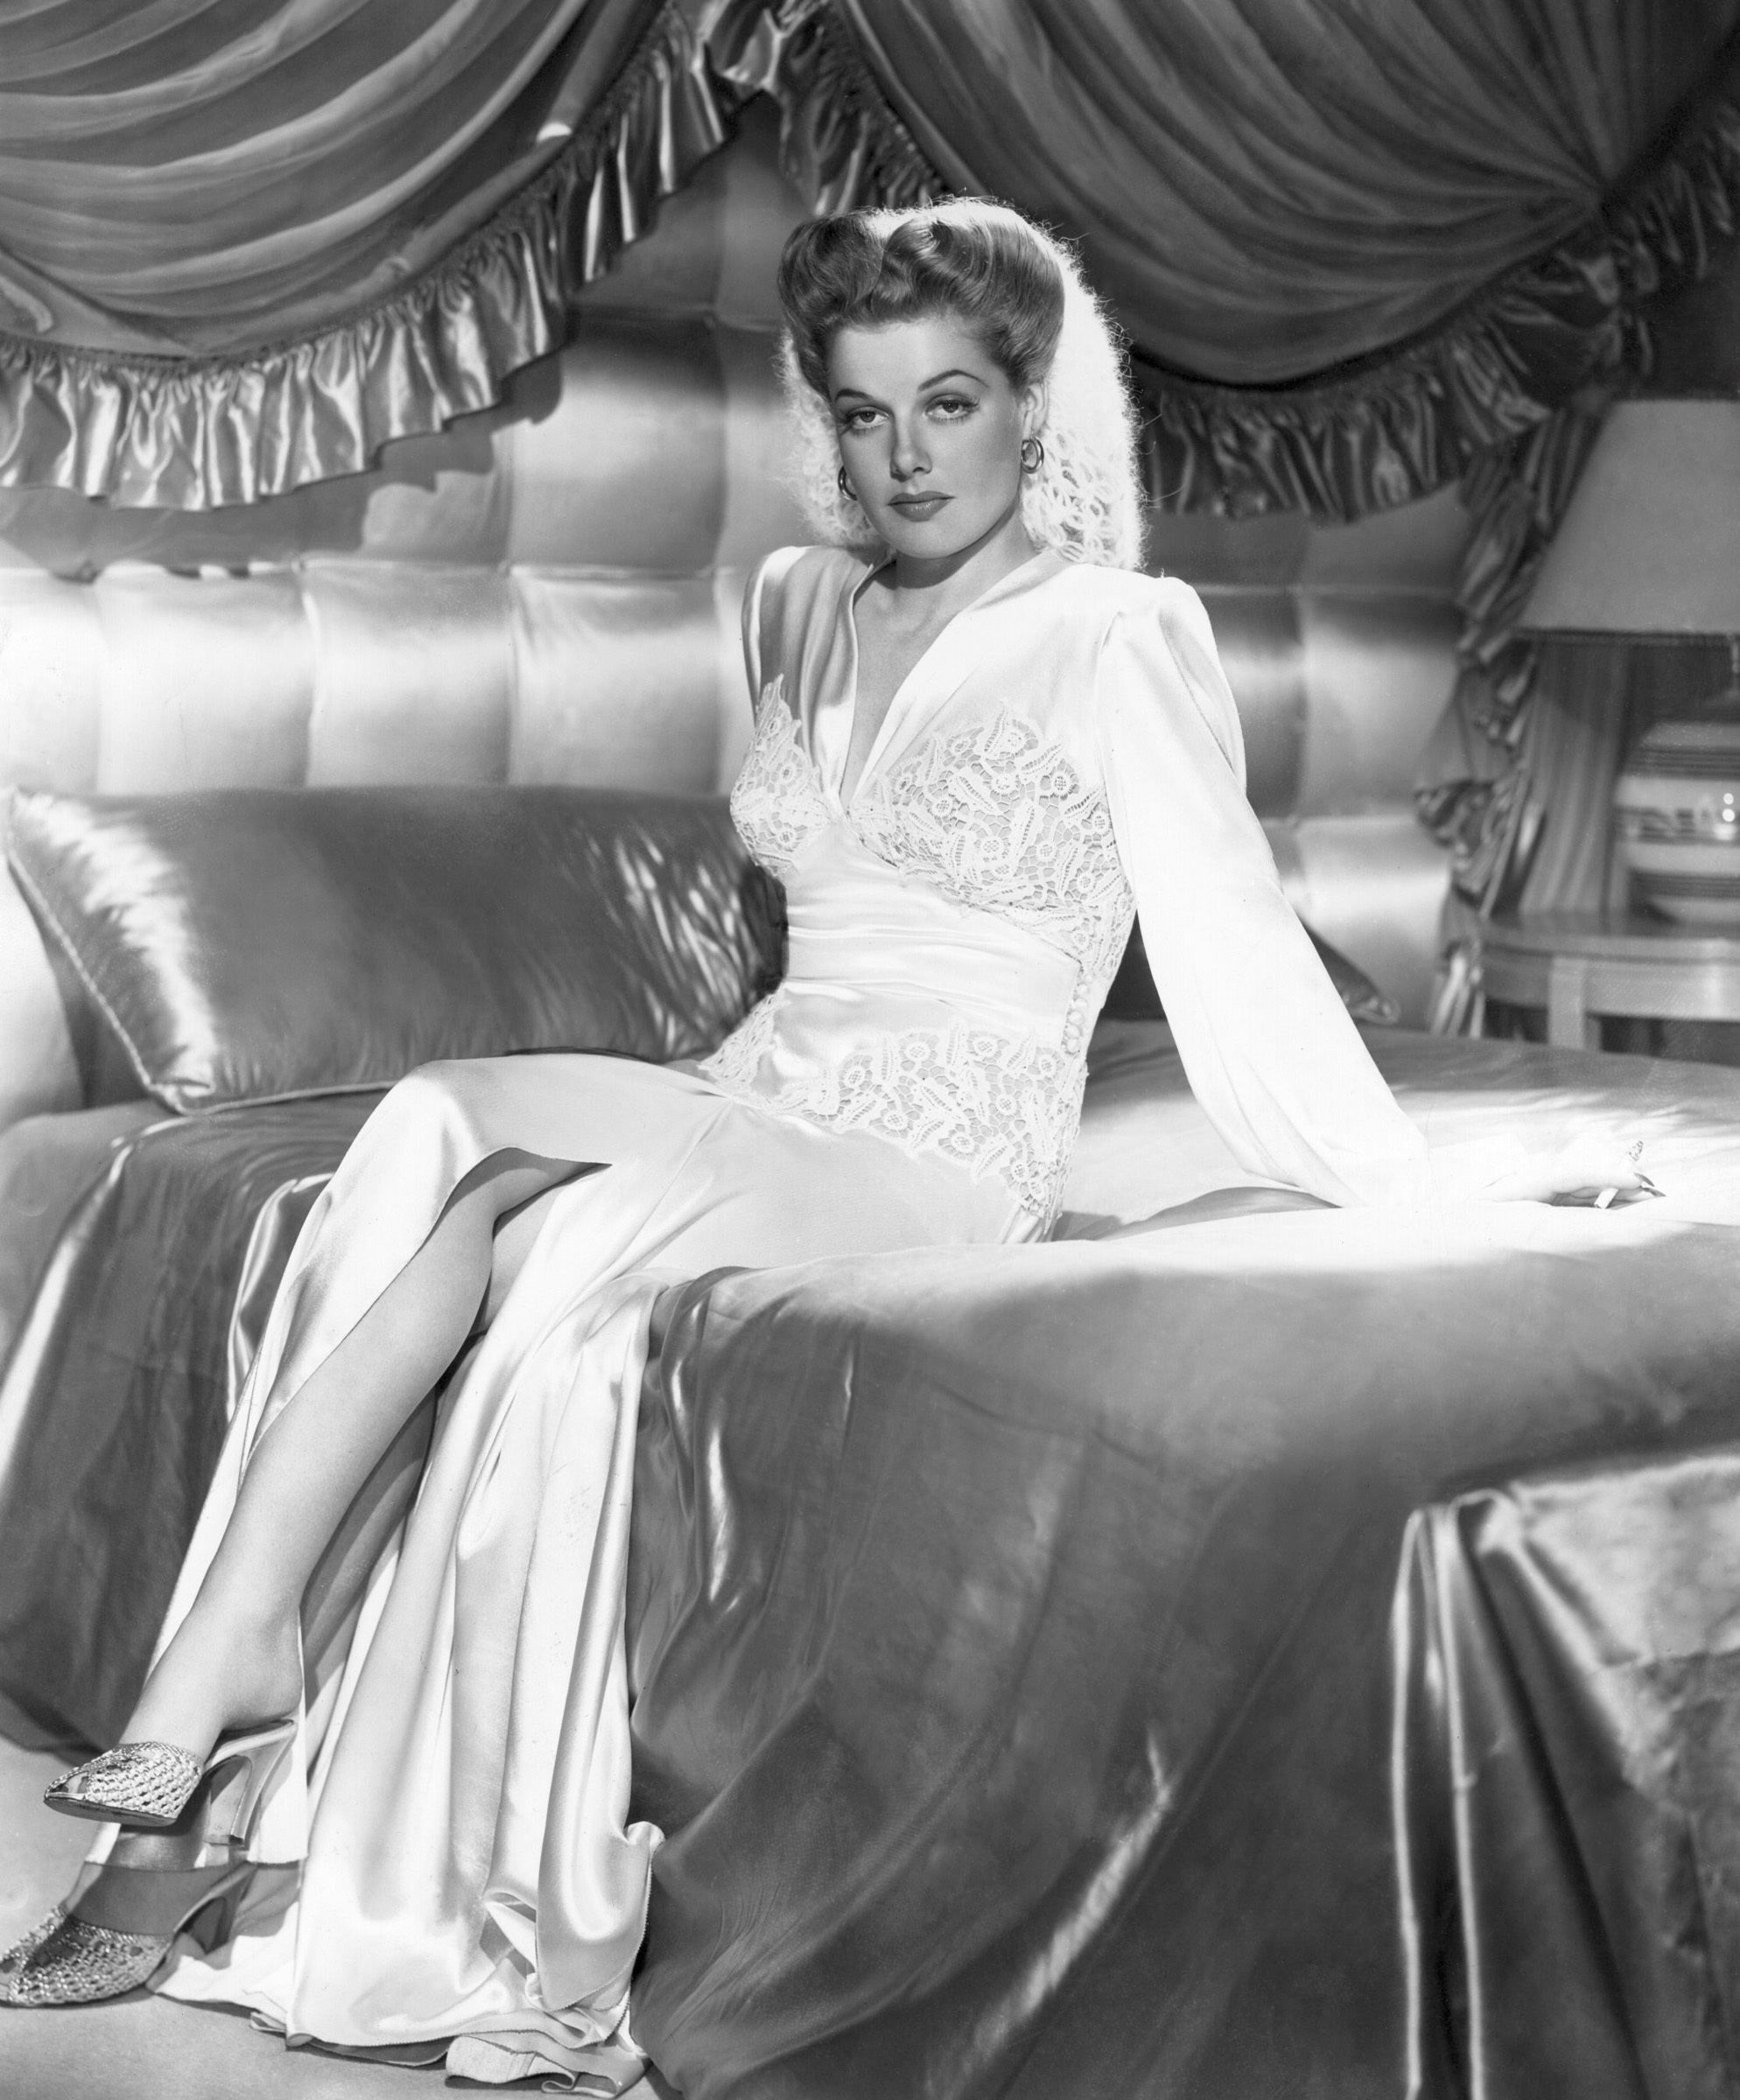 People who liked Ann Sheridan's feet, also liked.